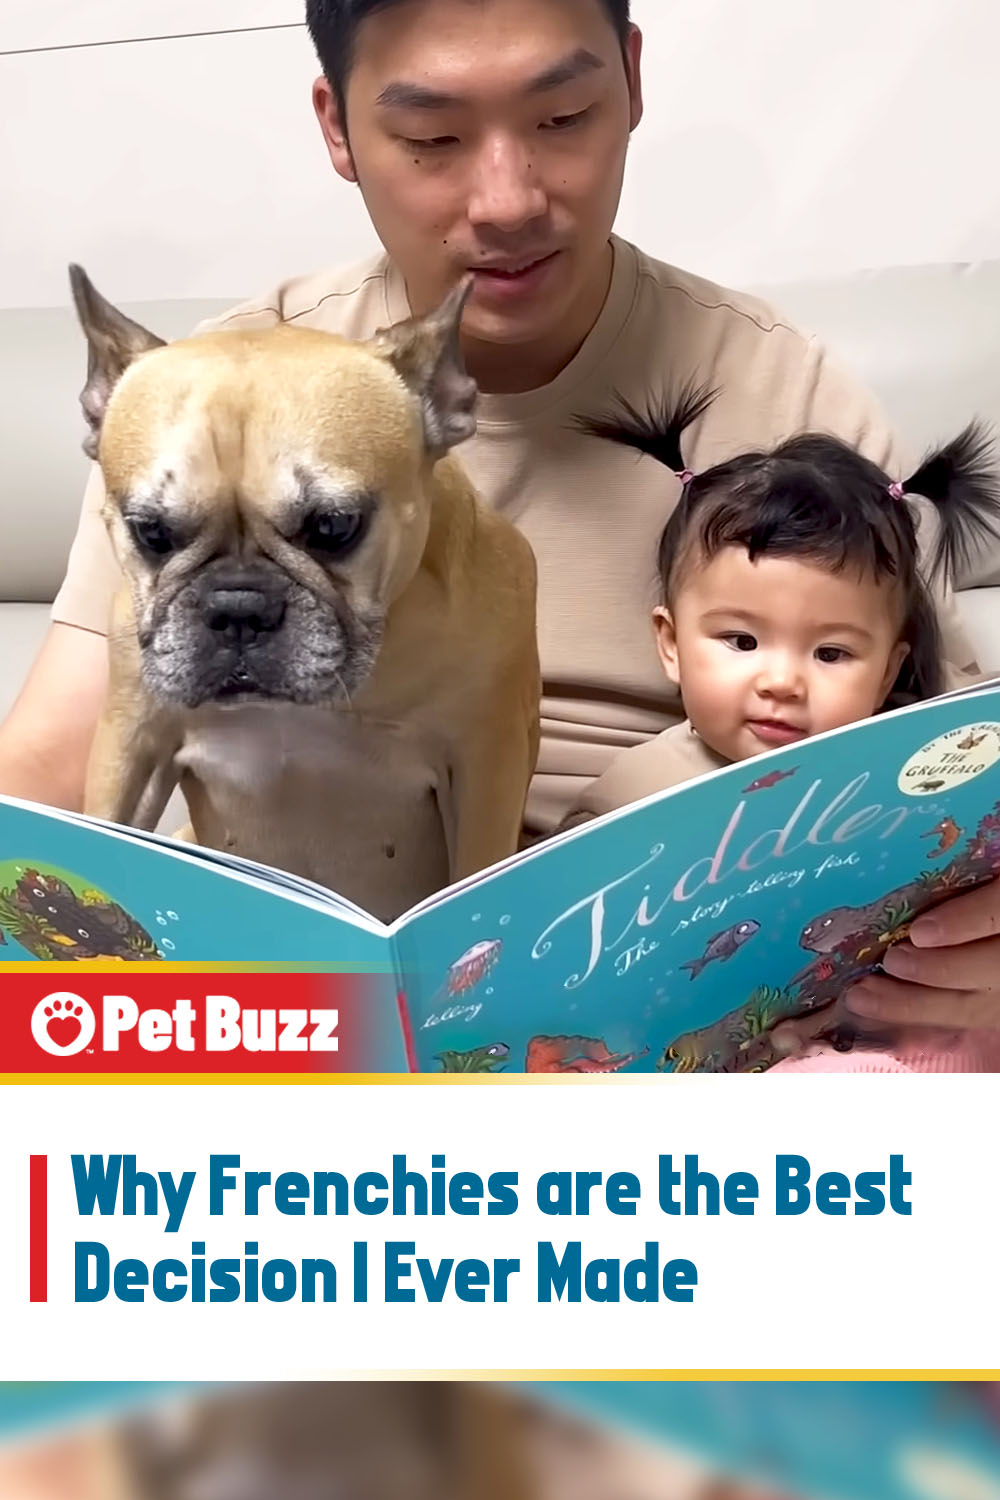 Why Frenchies are the Best Decision I Ever Made